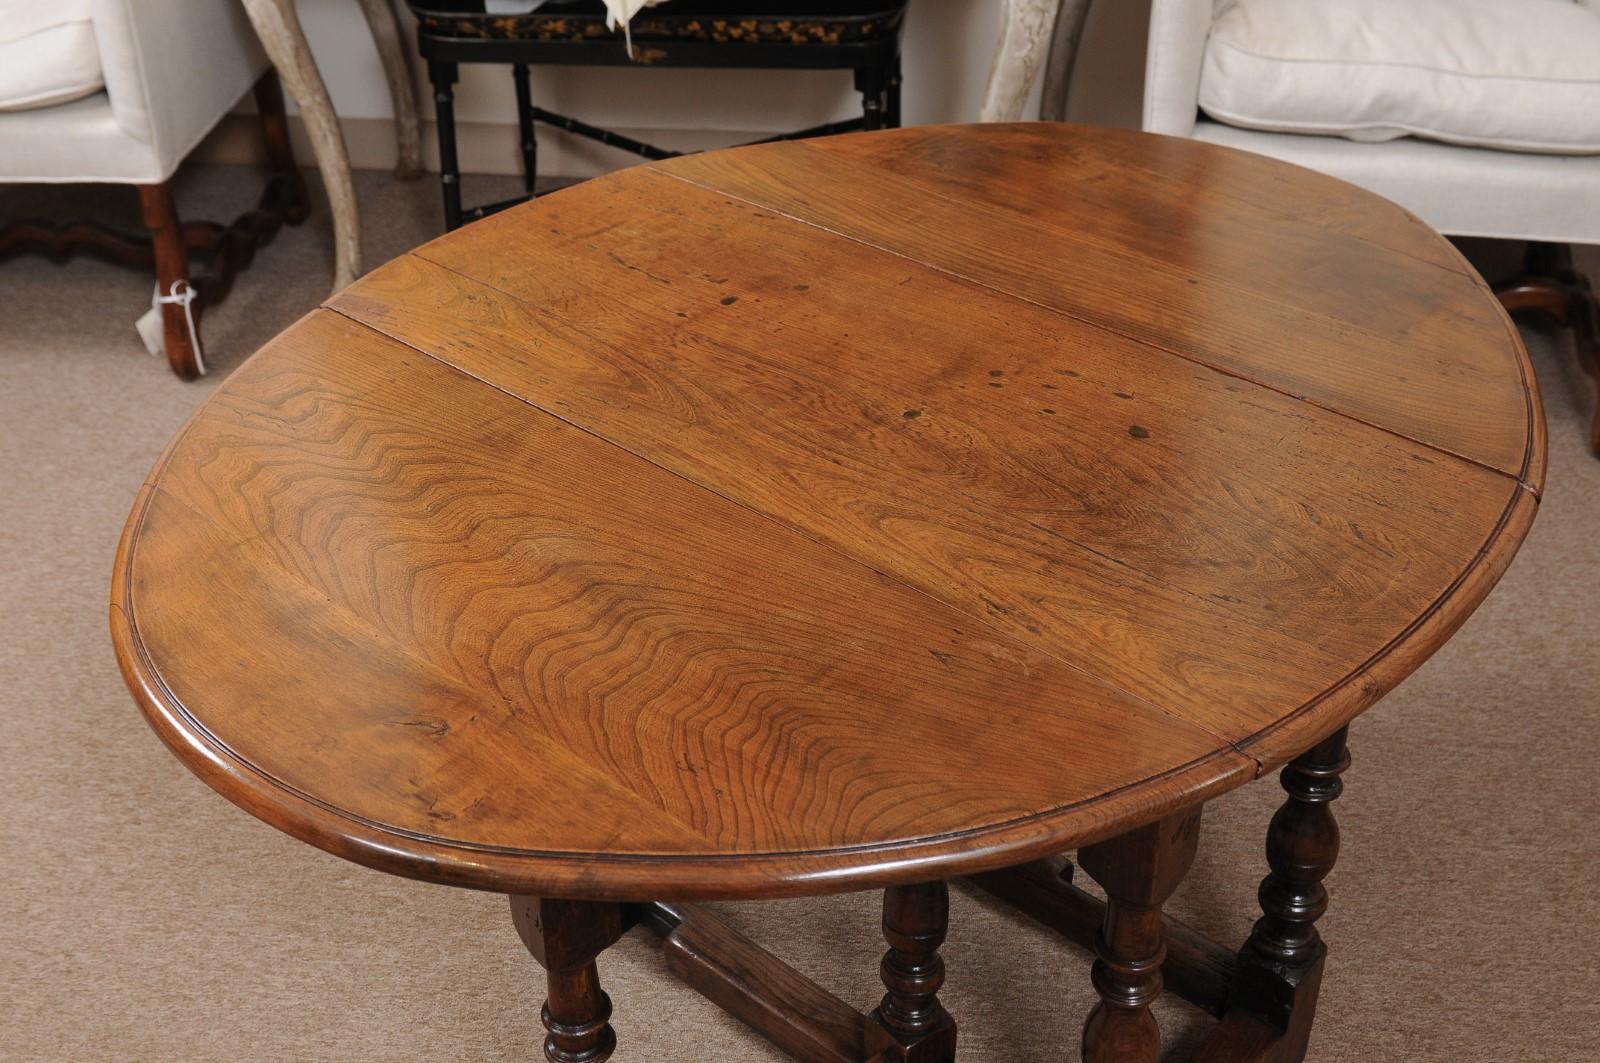 18th Century English Walnut Gate Leg Table with Drop Leaves & Turned Legs For Sale 2